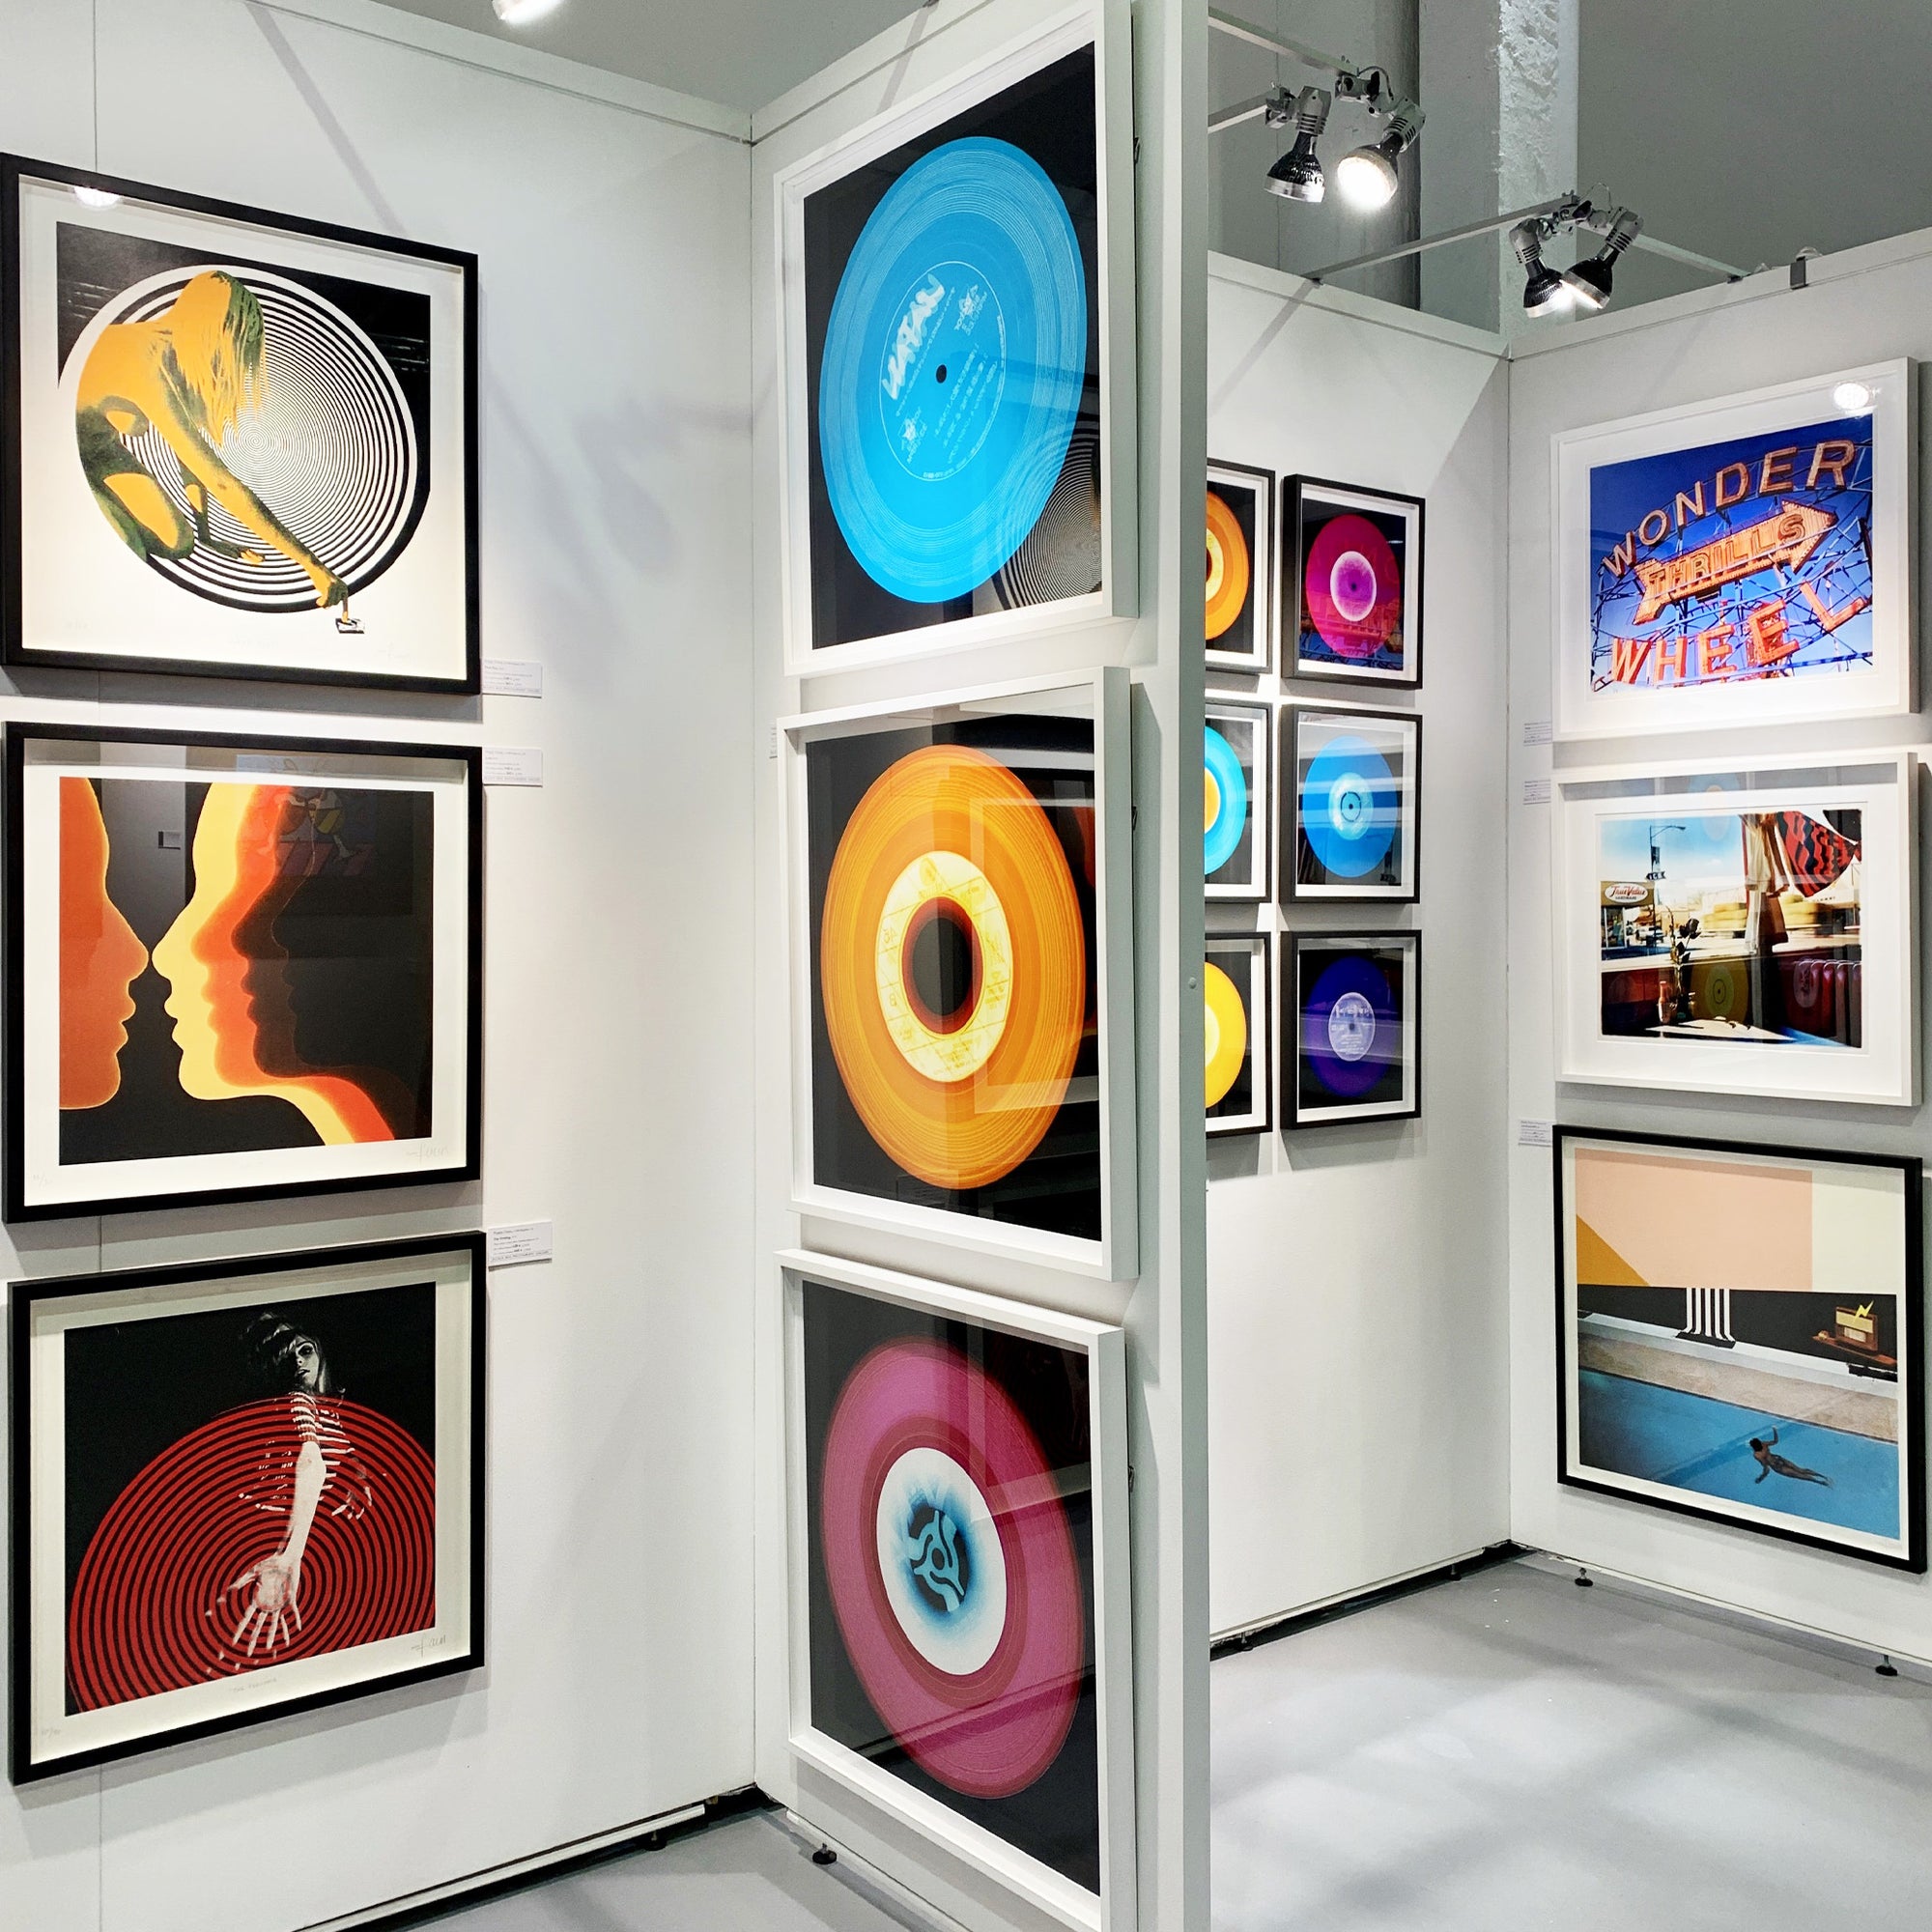 'Thirty Three Minutes (Flames)', by acclaimed contemporary photographers, Richard Heeps and Natasha Heidler. Their Vinyl Collection is a celebration of the vinyl record and analogue technology.